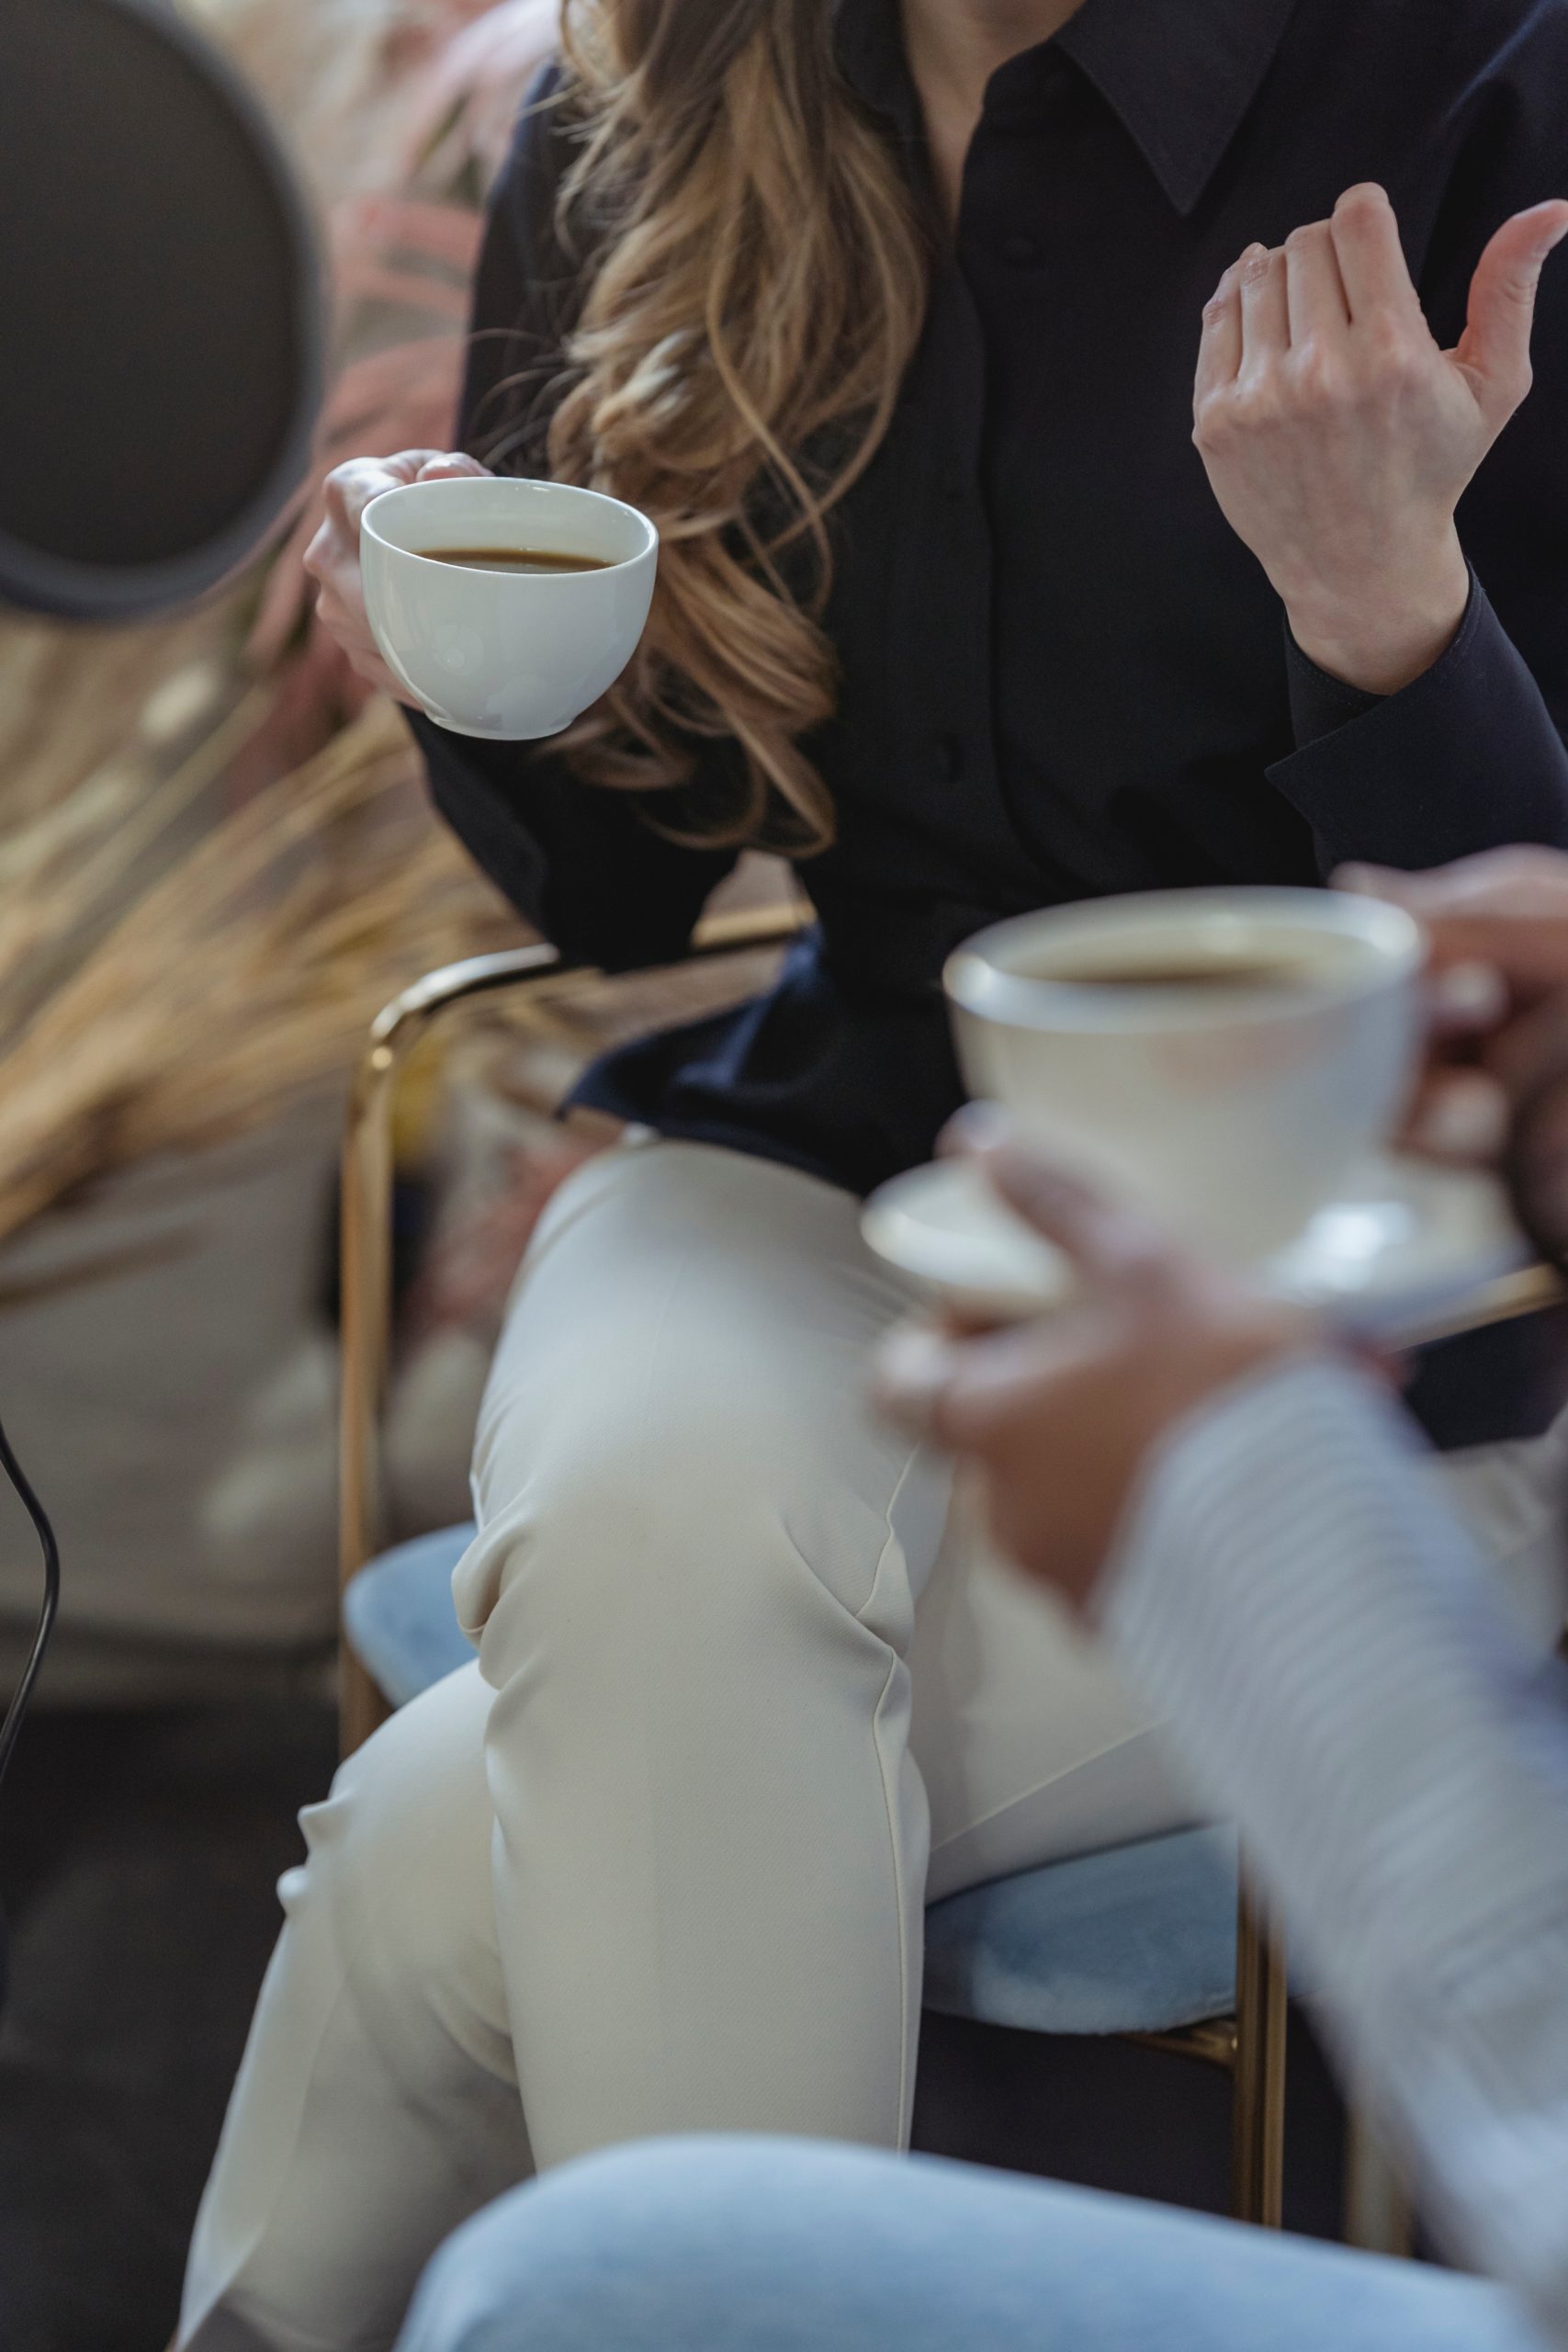 Woman drinking coffee from ceramic cups during interview